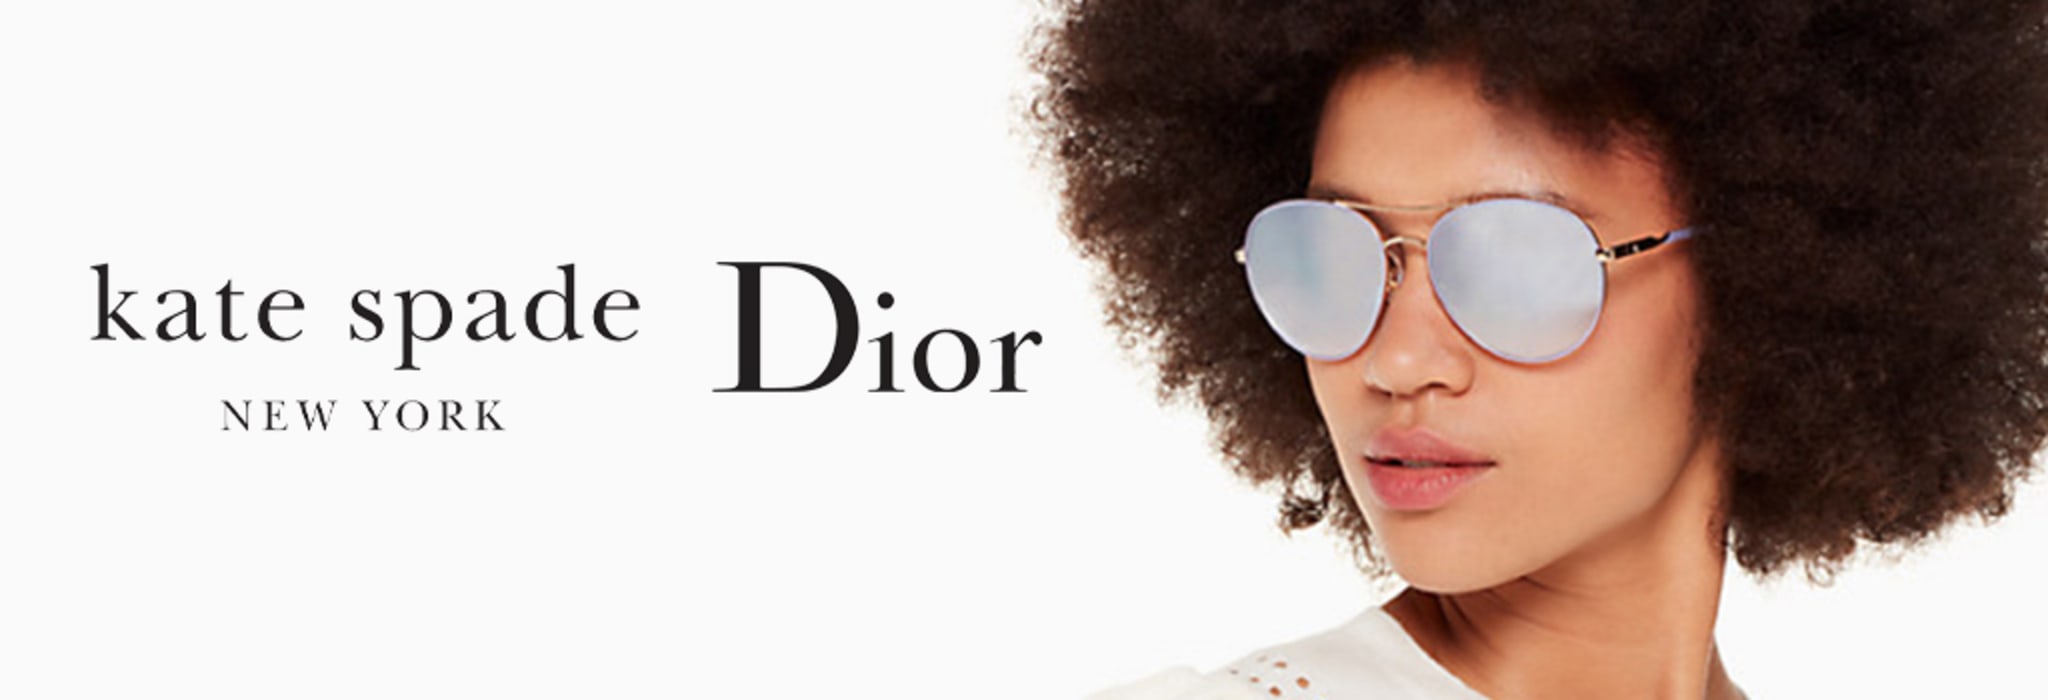 CHRISTIAN DIOR Sunglasses DiorMirrored I22HD  LO Outlet  LookerOnline